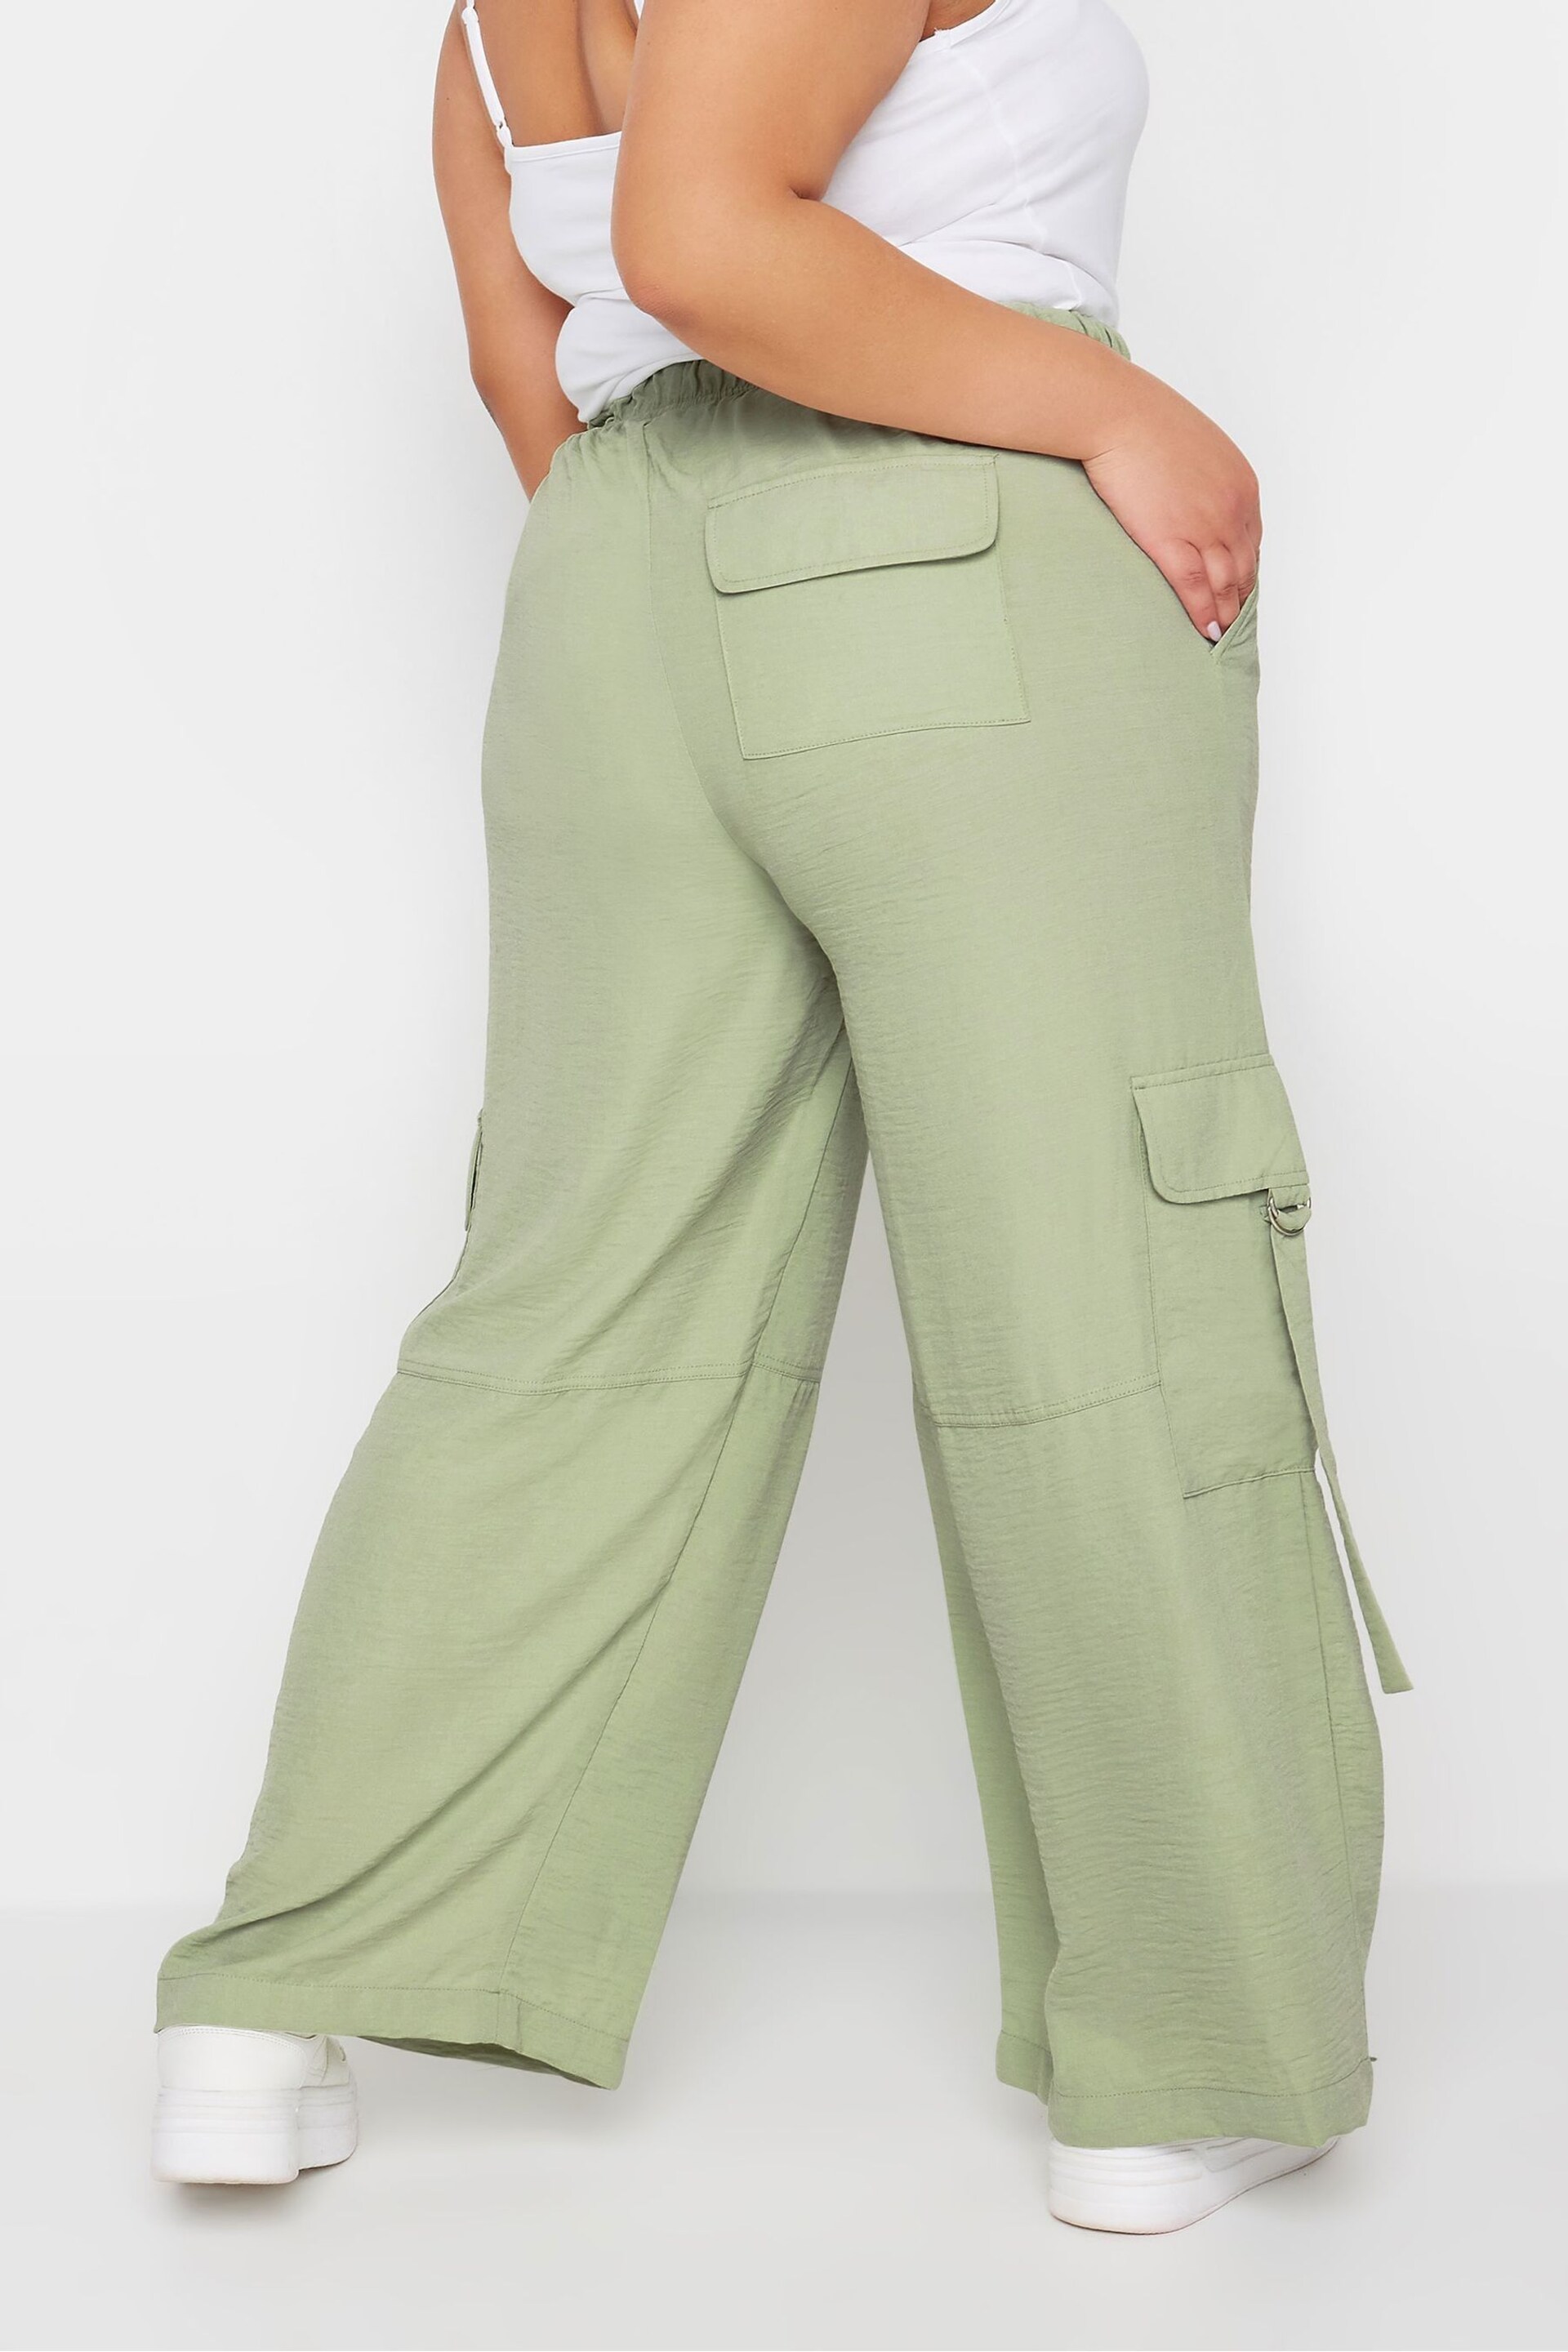 Yours Curve Green Twill Cargo Trousers - Image 4 of 5